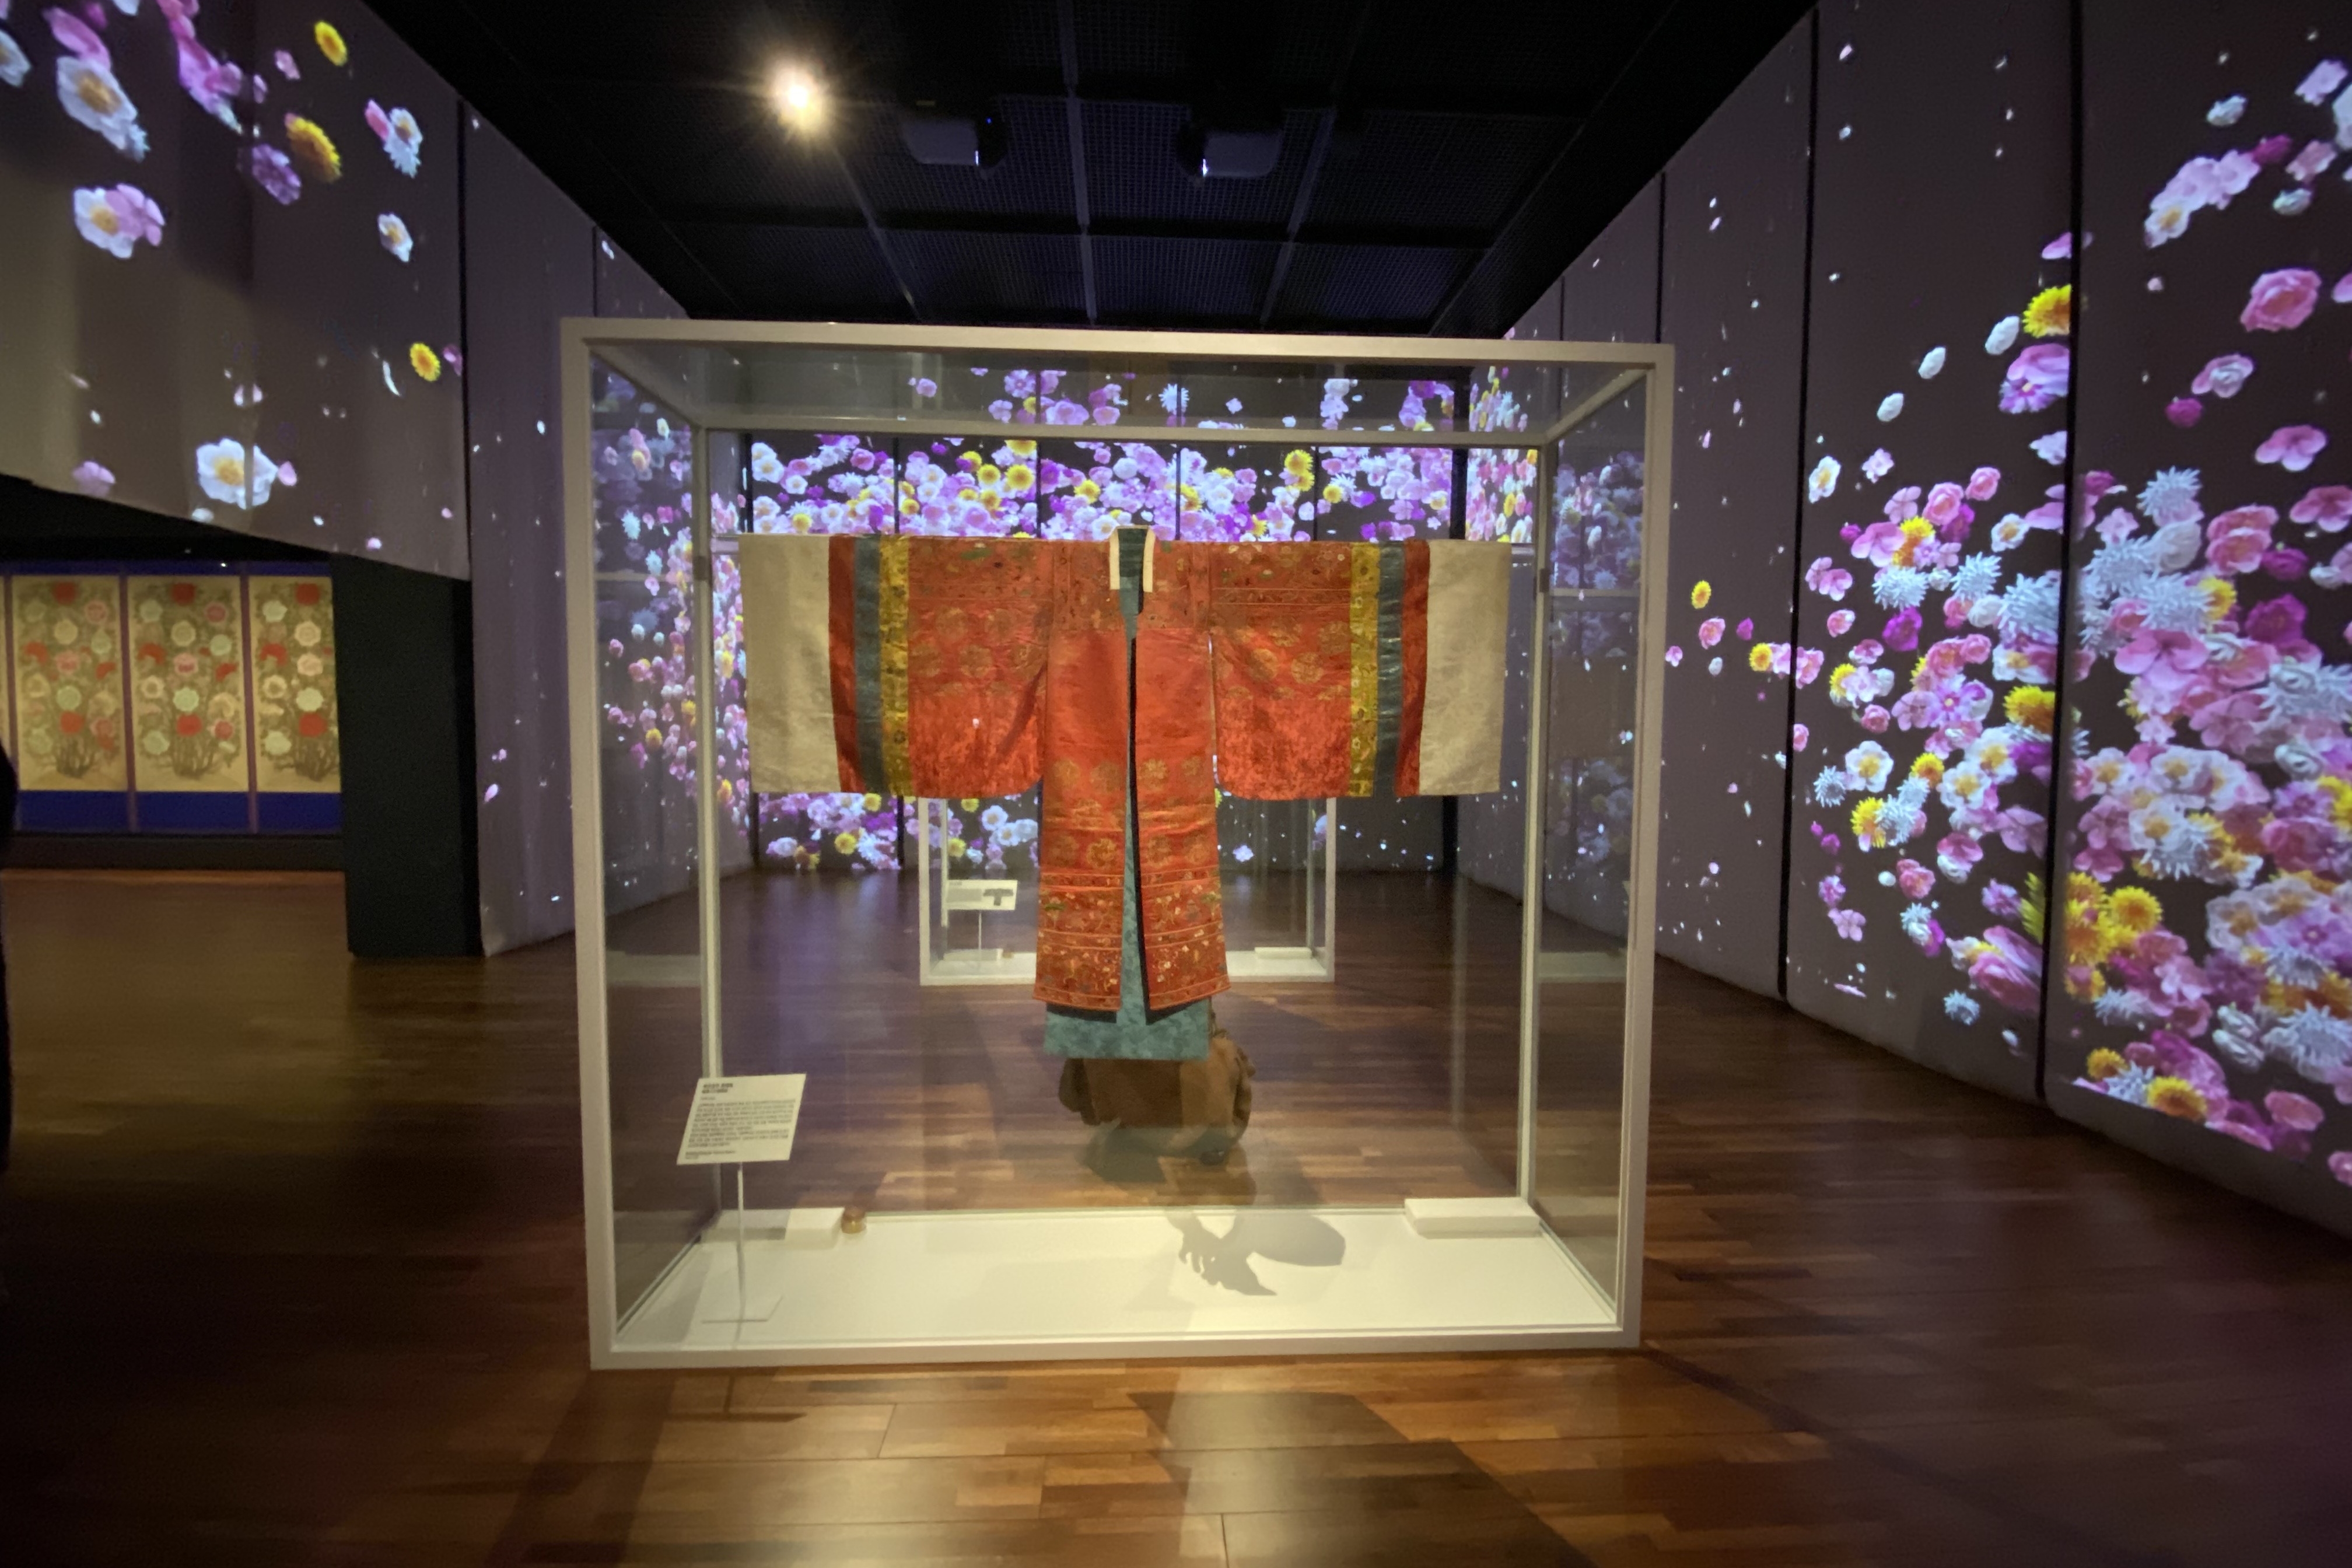 National Palace Museum of Korea2 : A traditional clothing spread out in a glass display case in the middle of the exhibition room